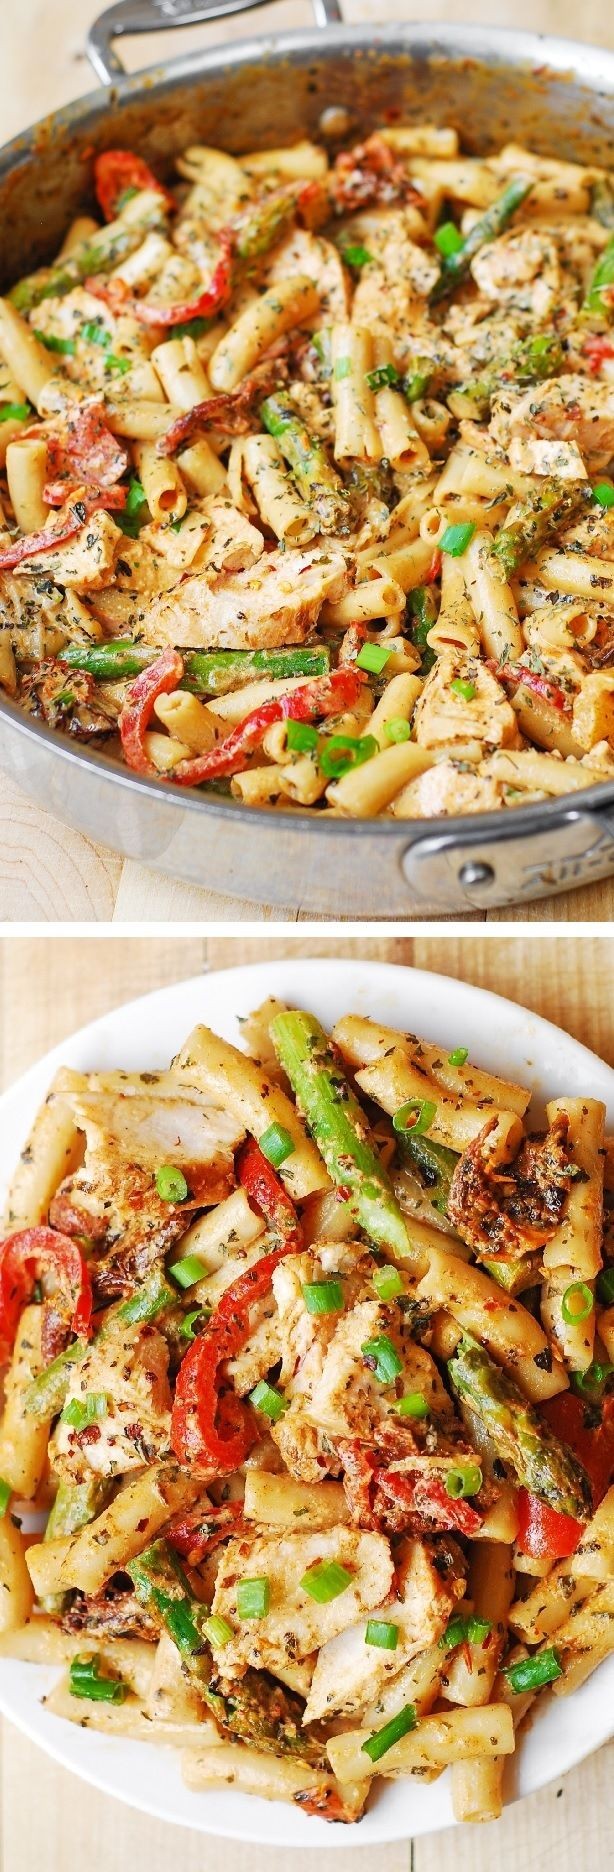 Chicken Alfredo Pasta with Bell Peppers, Asparagus...